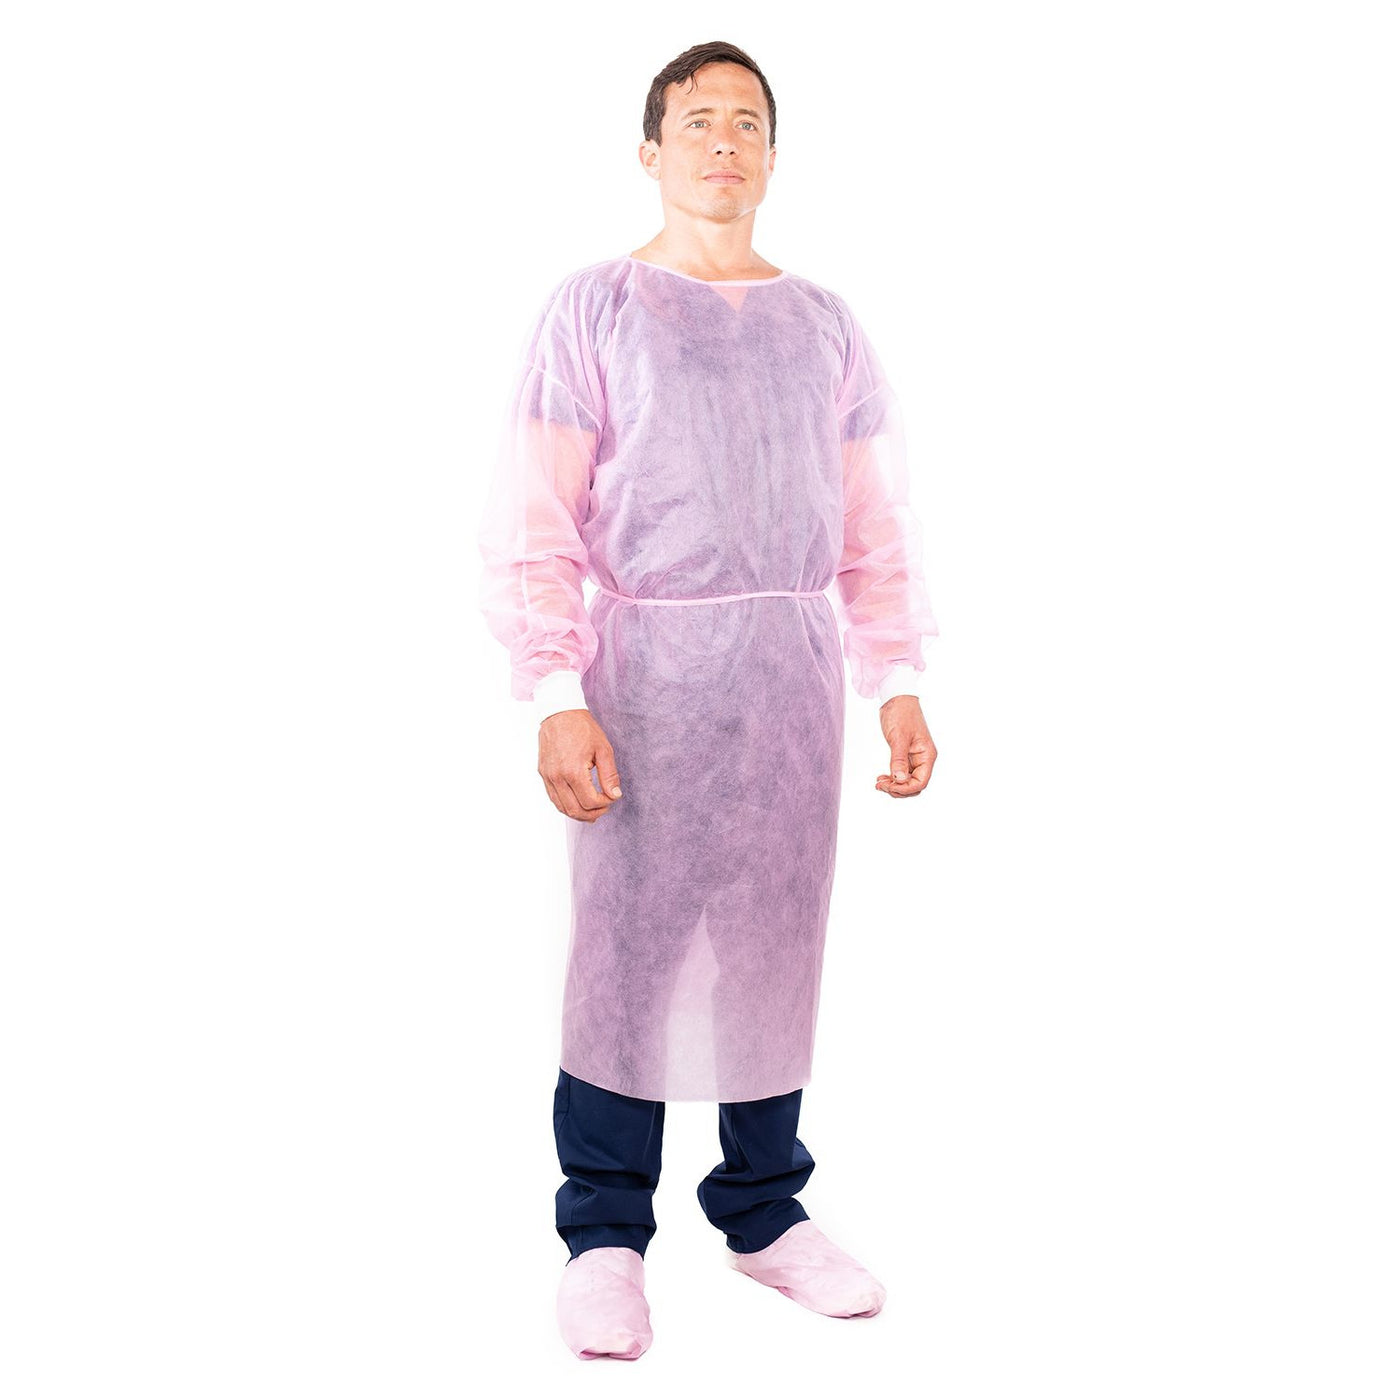 Pink Disposable Isolation Gowns - Medical & PPE Gowns (Case of 50)